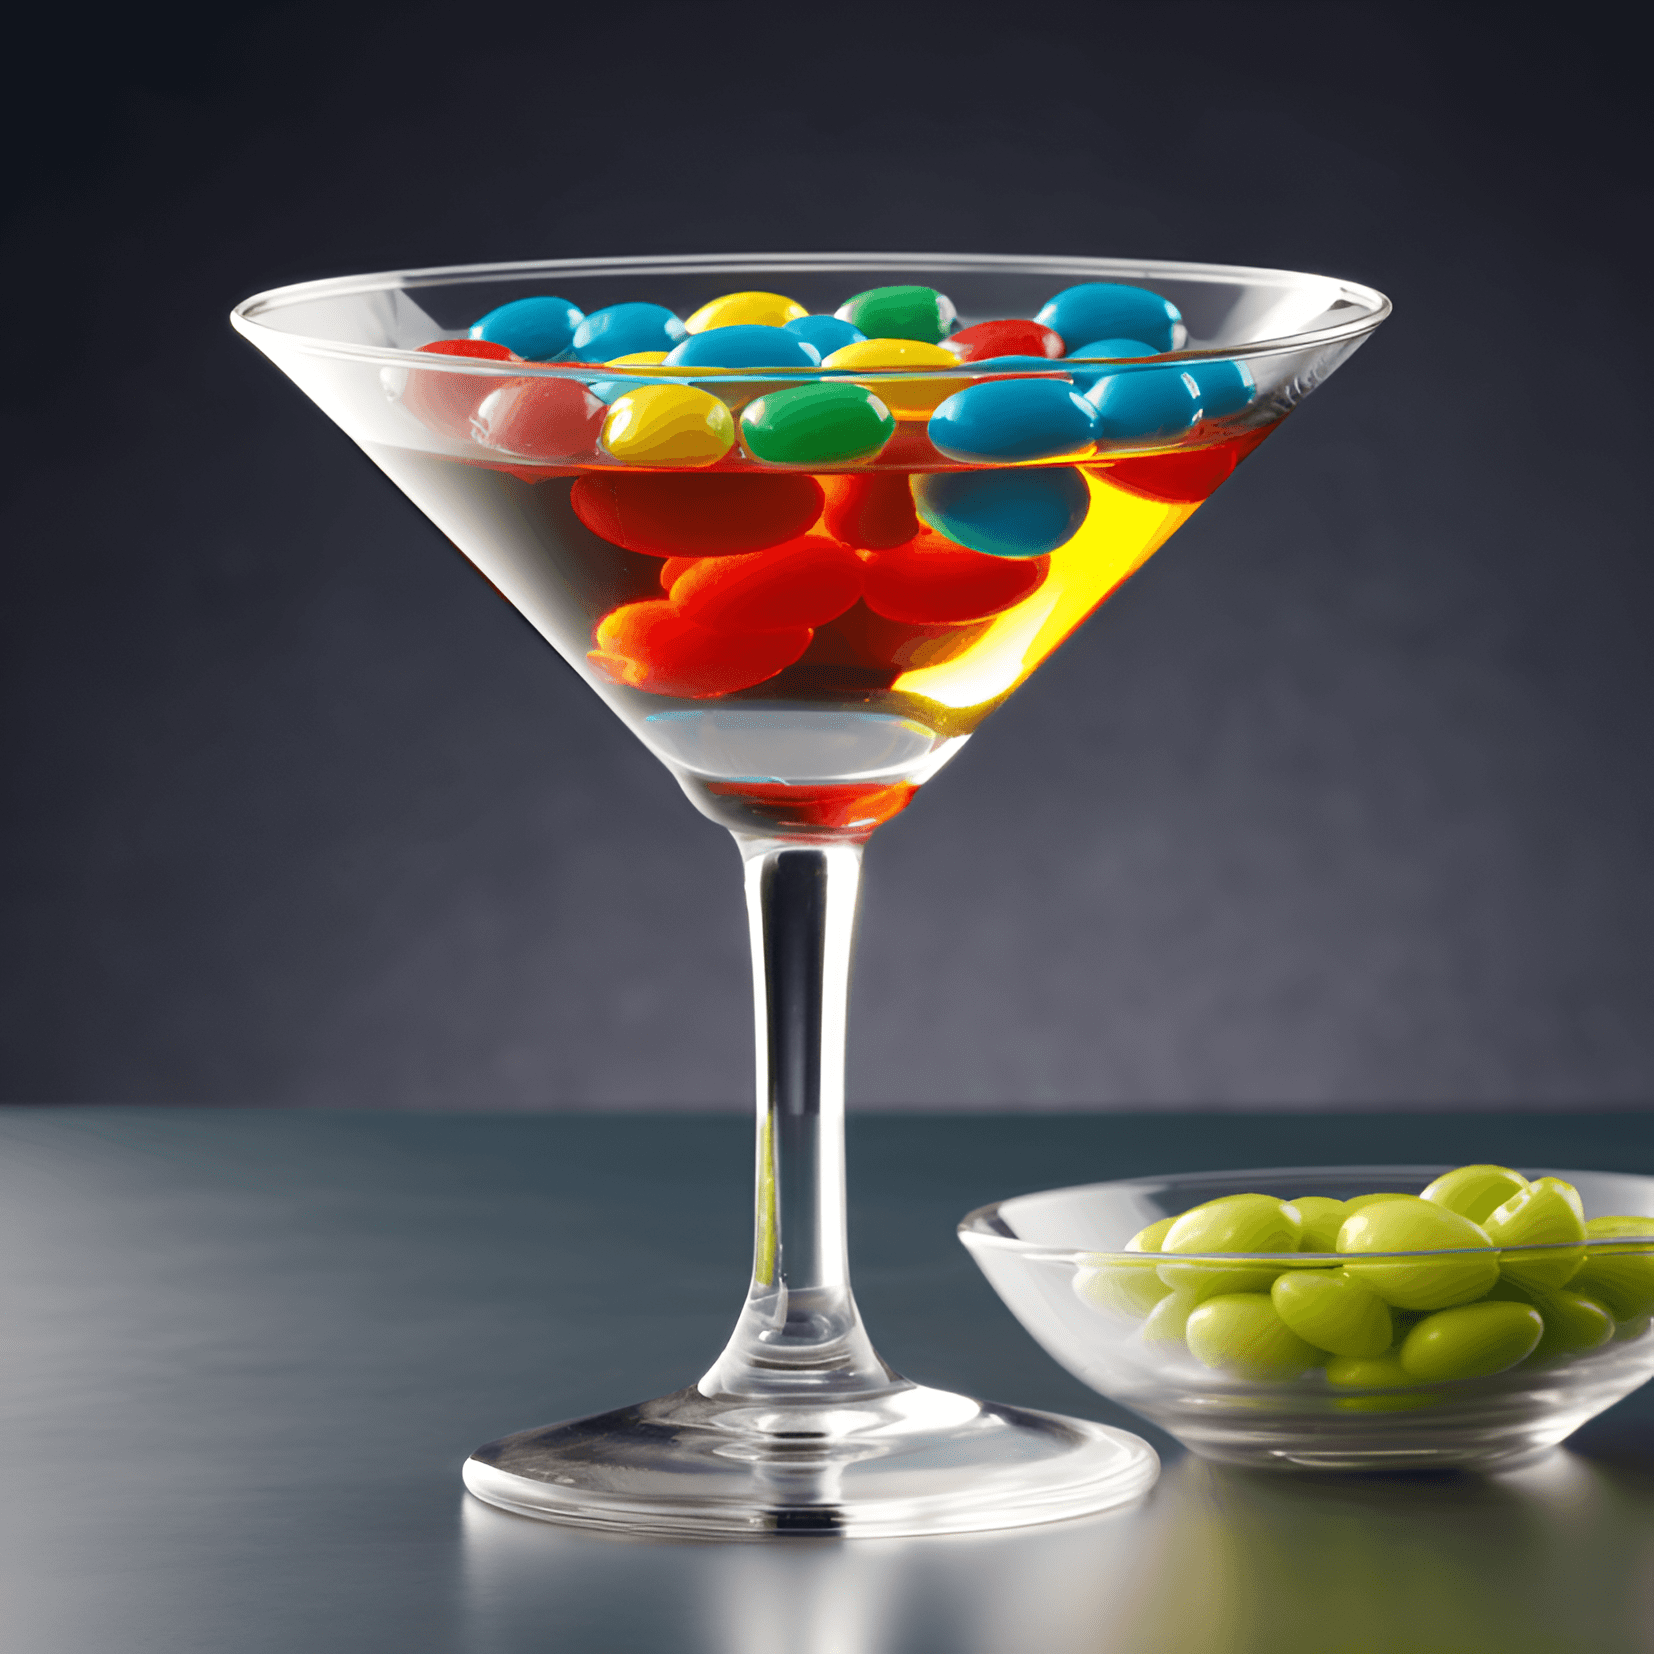 Jelly Bean Cocktail Recipe - The Jelly Bean cocktail has a sweet and fruity taste, with a slight tanginess from the citrus flavors. It is a light and refreshing drink that is perfect for those who enjoy a burst of fruitiness in their cocktails.